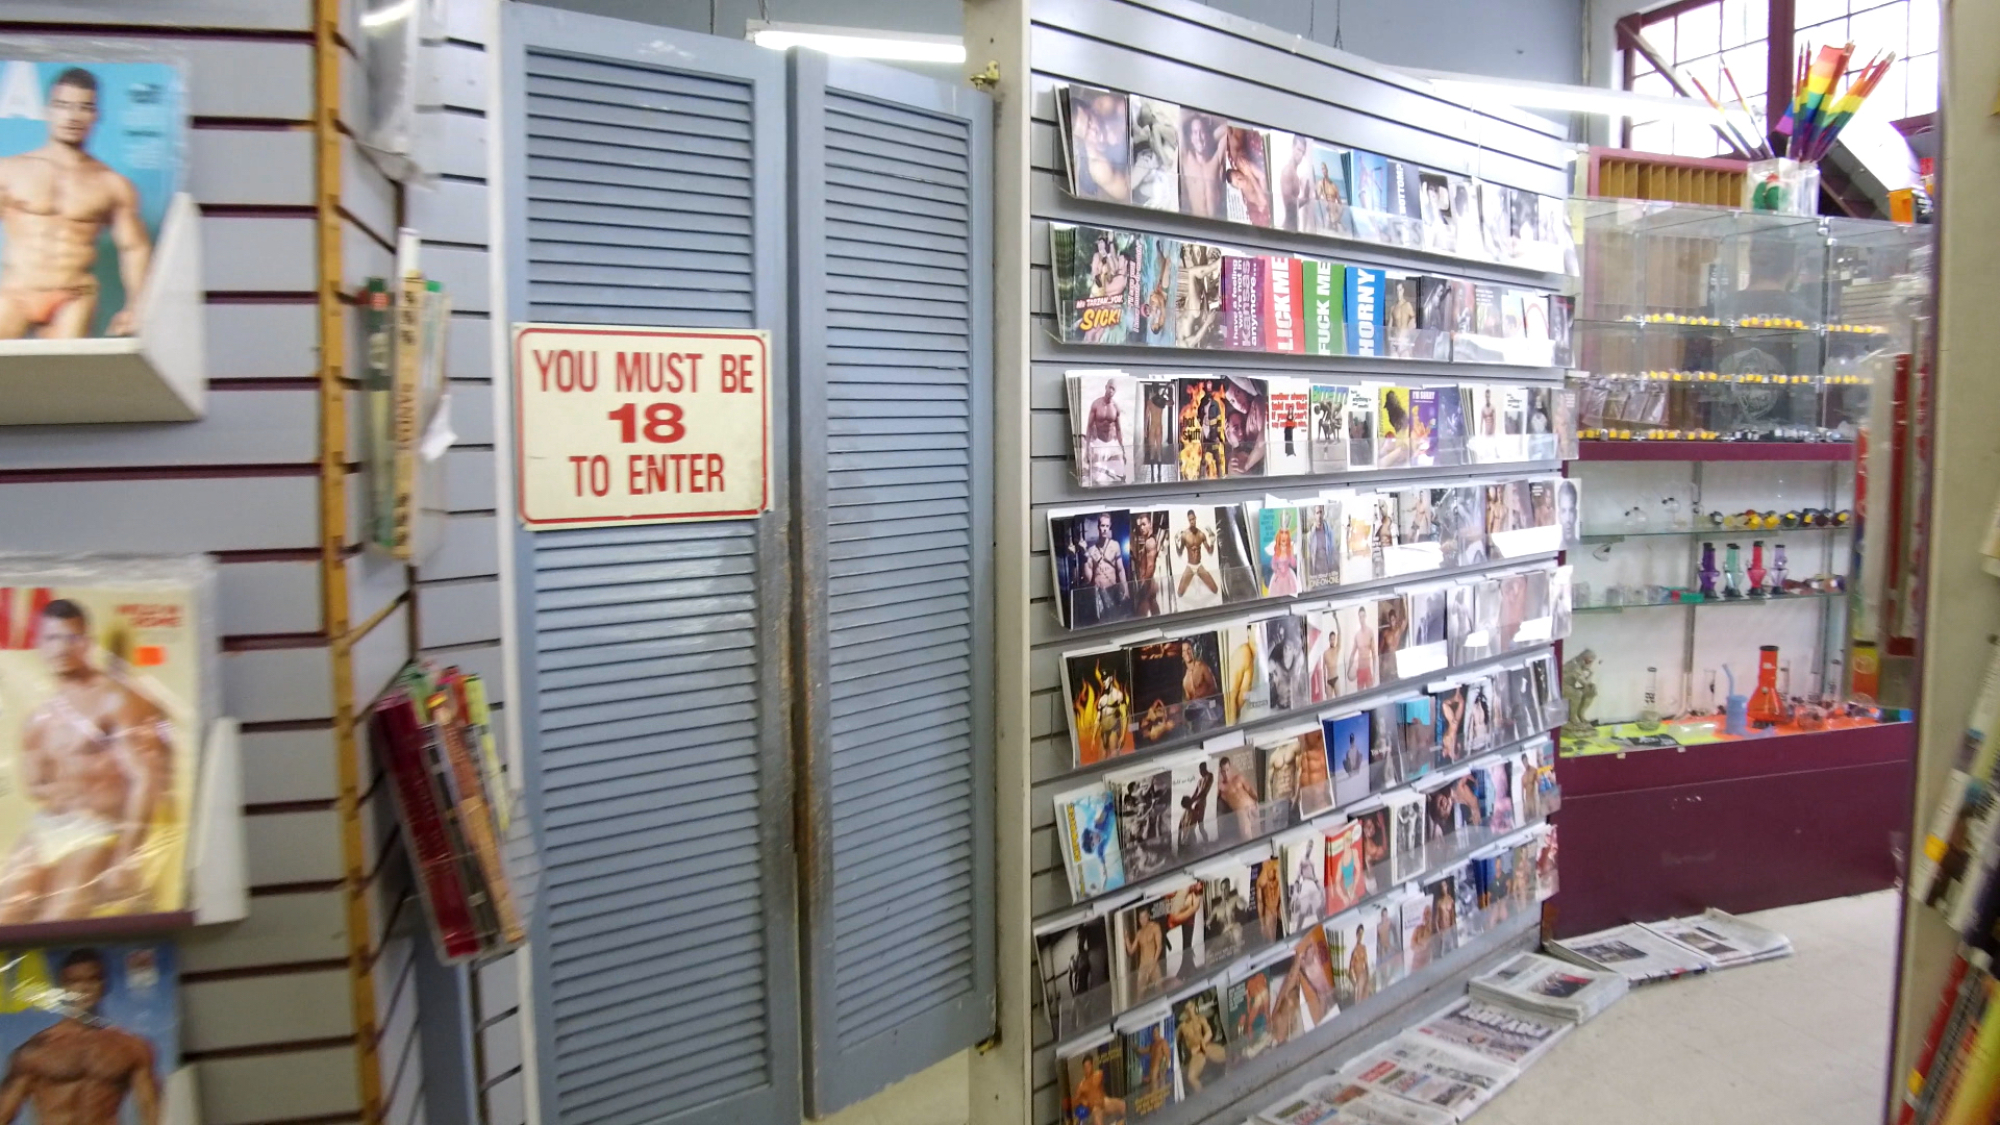 Inside the infamous West Hollywood gay pornography book and video shop Circus of Books.